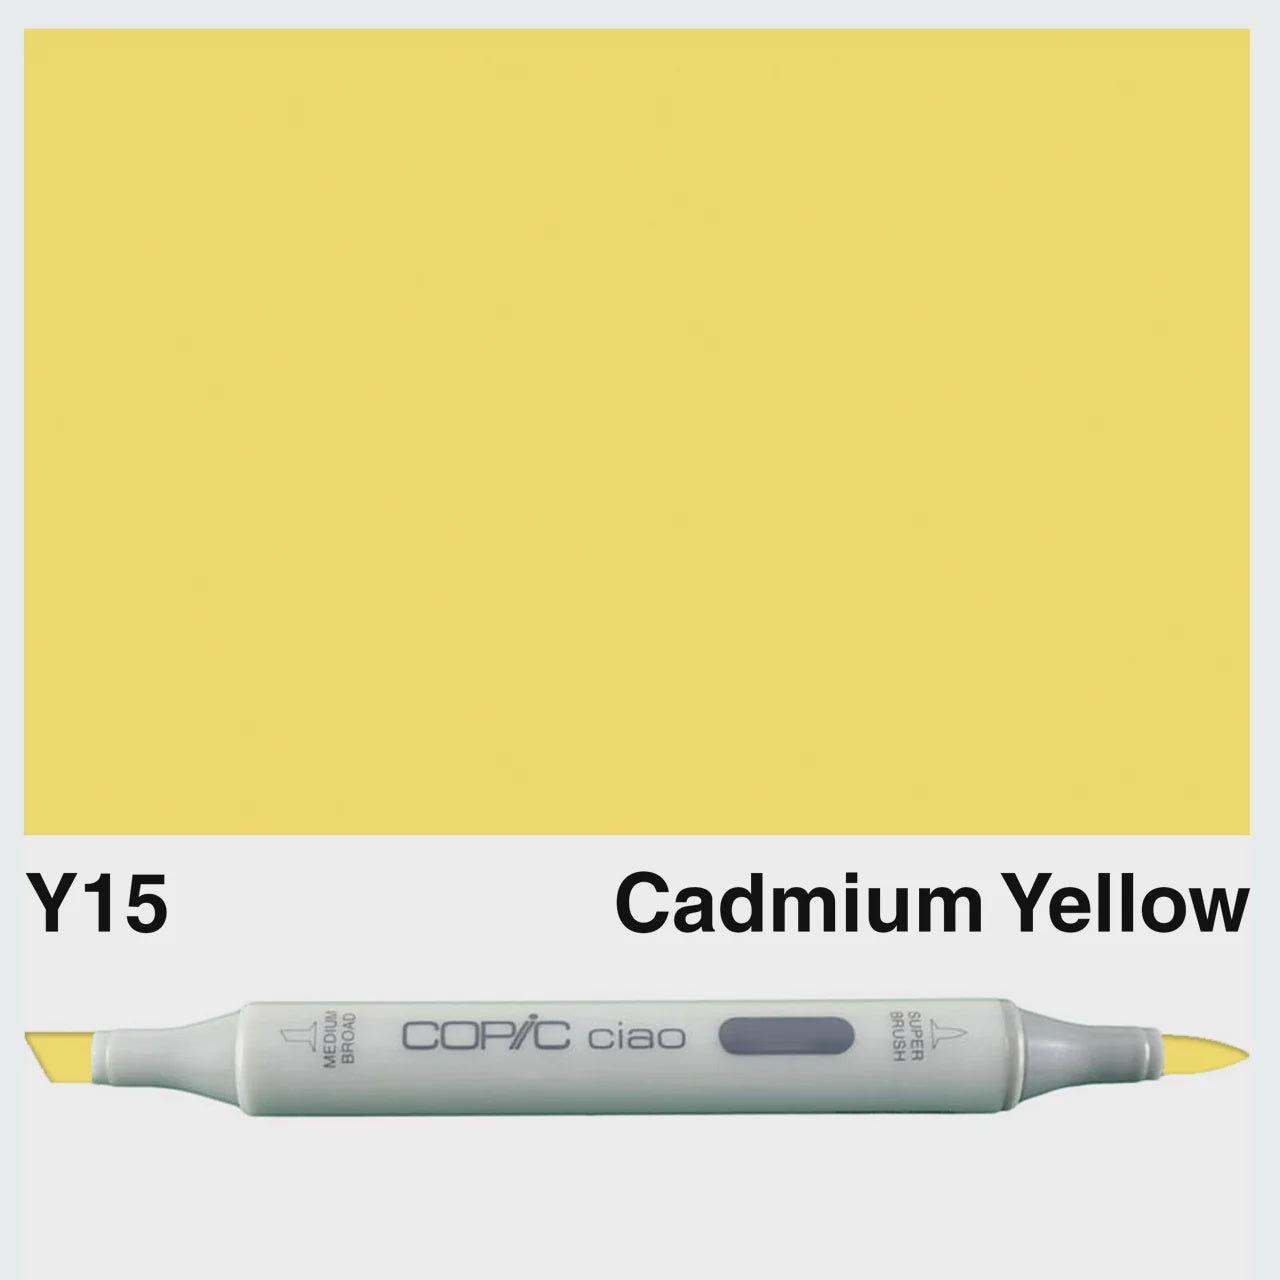 CIAO Y15 CADMIUM YELLOW